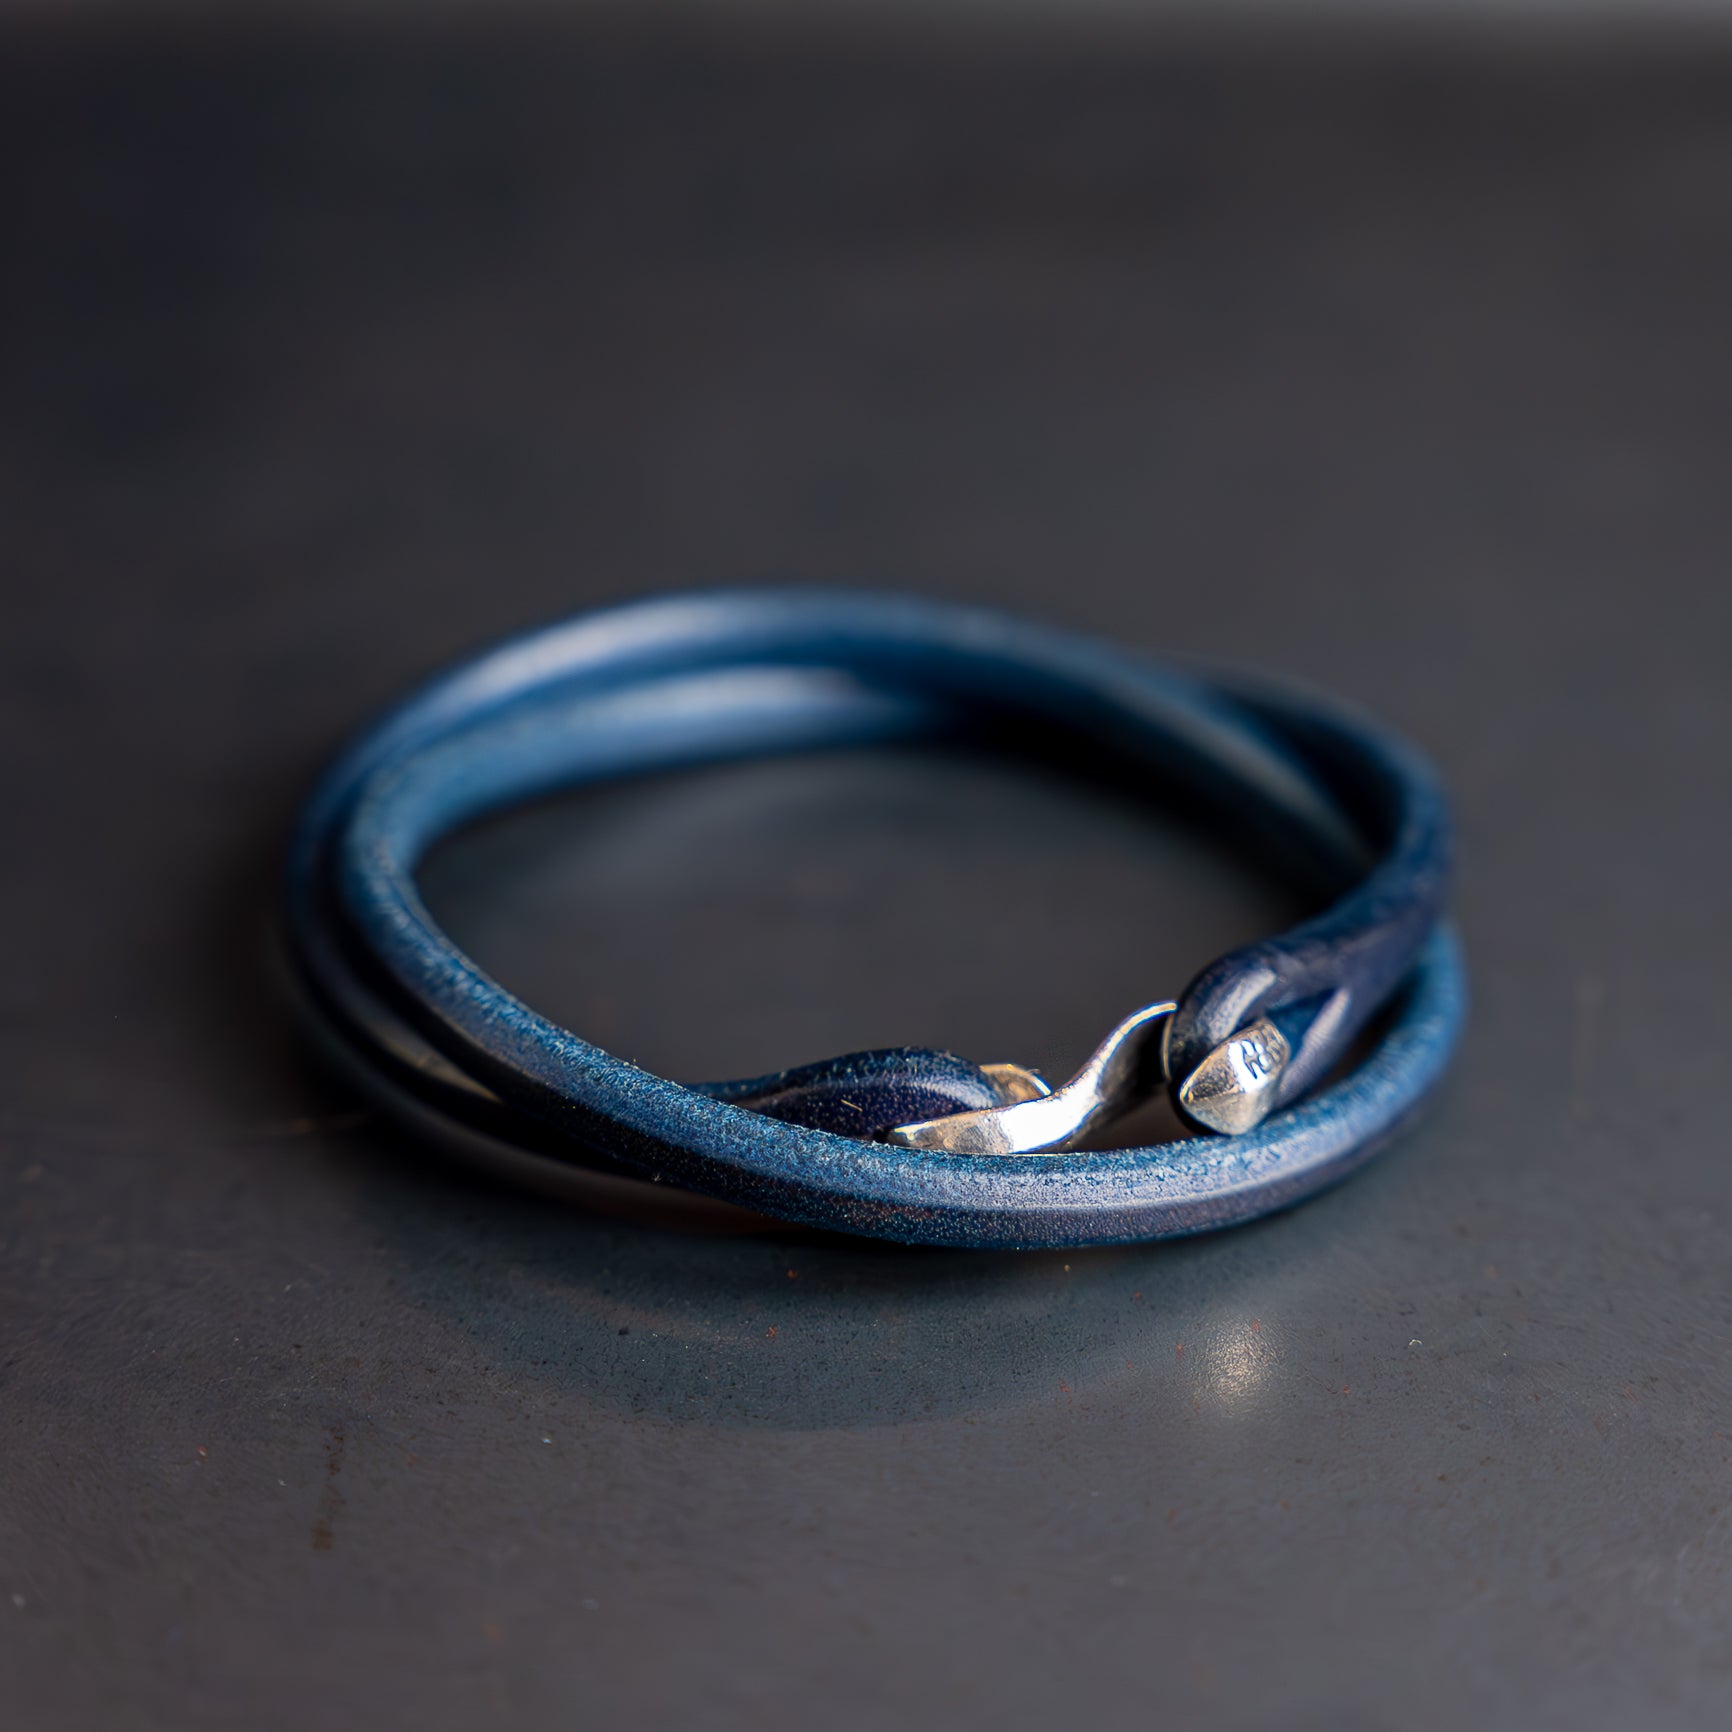 Nina Braided Leather Wrap in Silverplate by Lizzy James